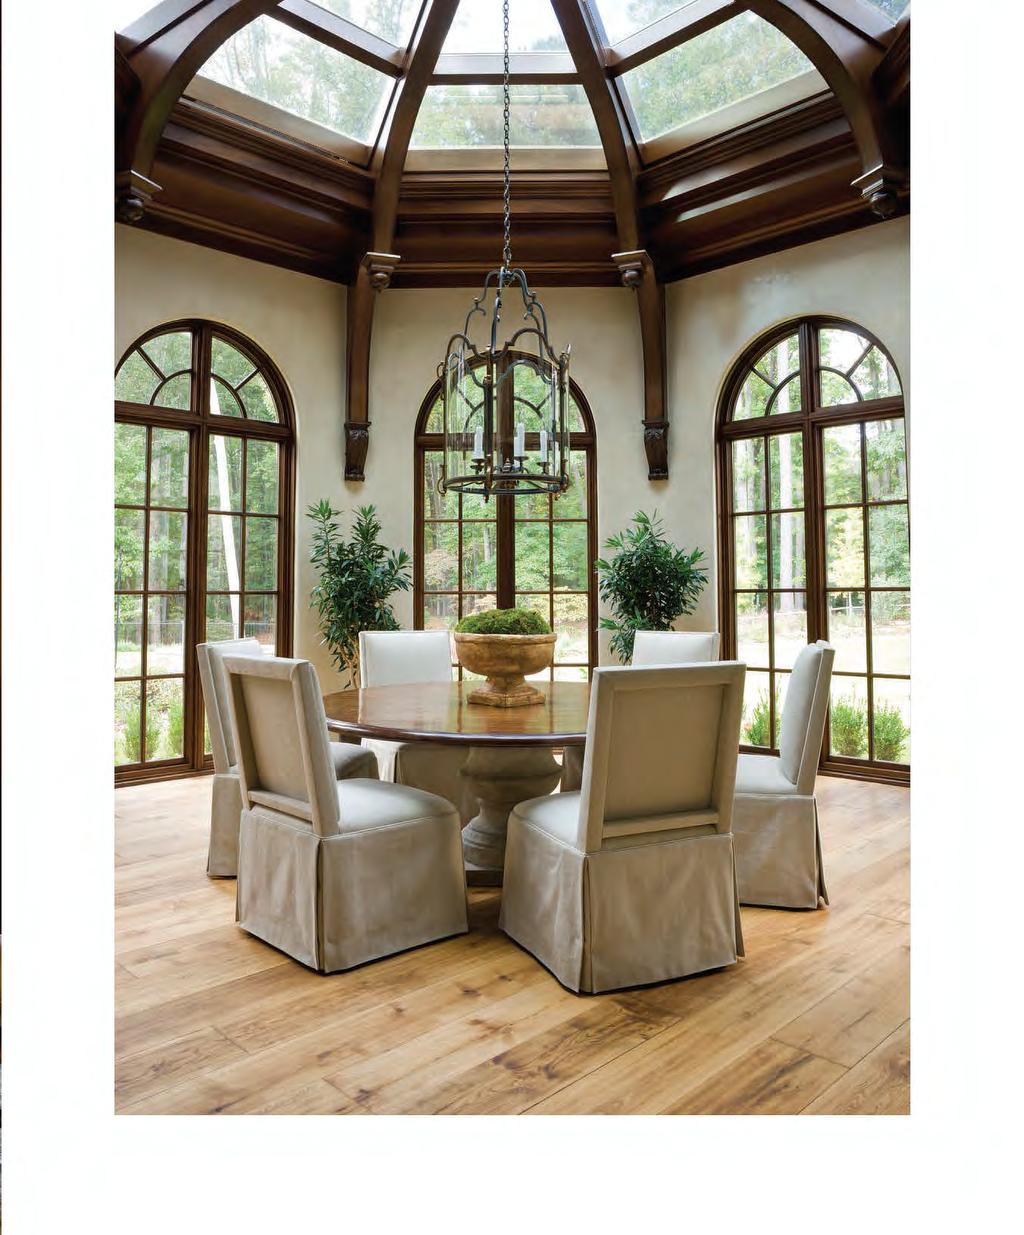 above Inspired by the Biltmore Estate s interior conservatory, architect Bill Harrison designed a breakfast room with sweeping mahogany